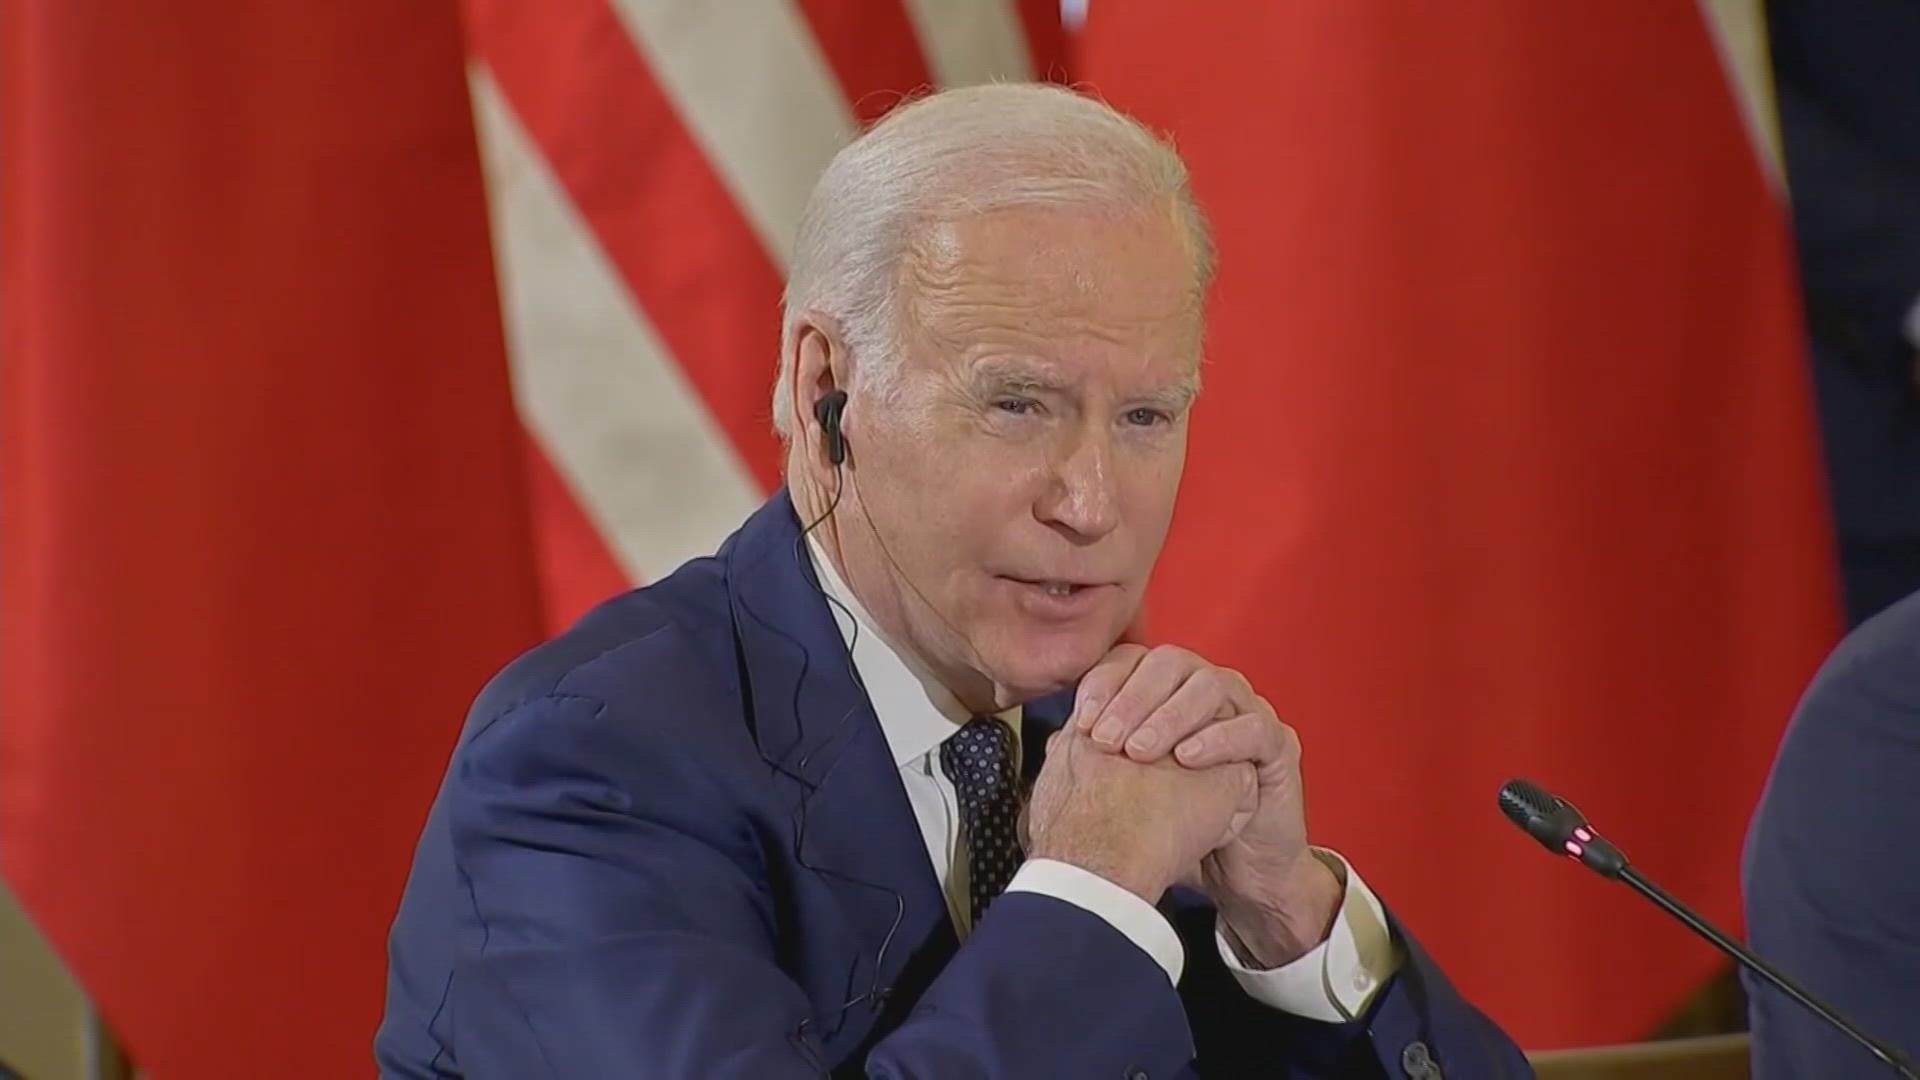 Biden arrived in Warsaw on Monday after paying an unannounced visit to Kyiv on a mission to solidify Western unity.